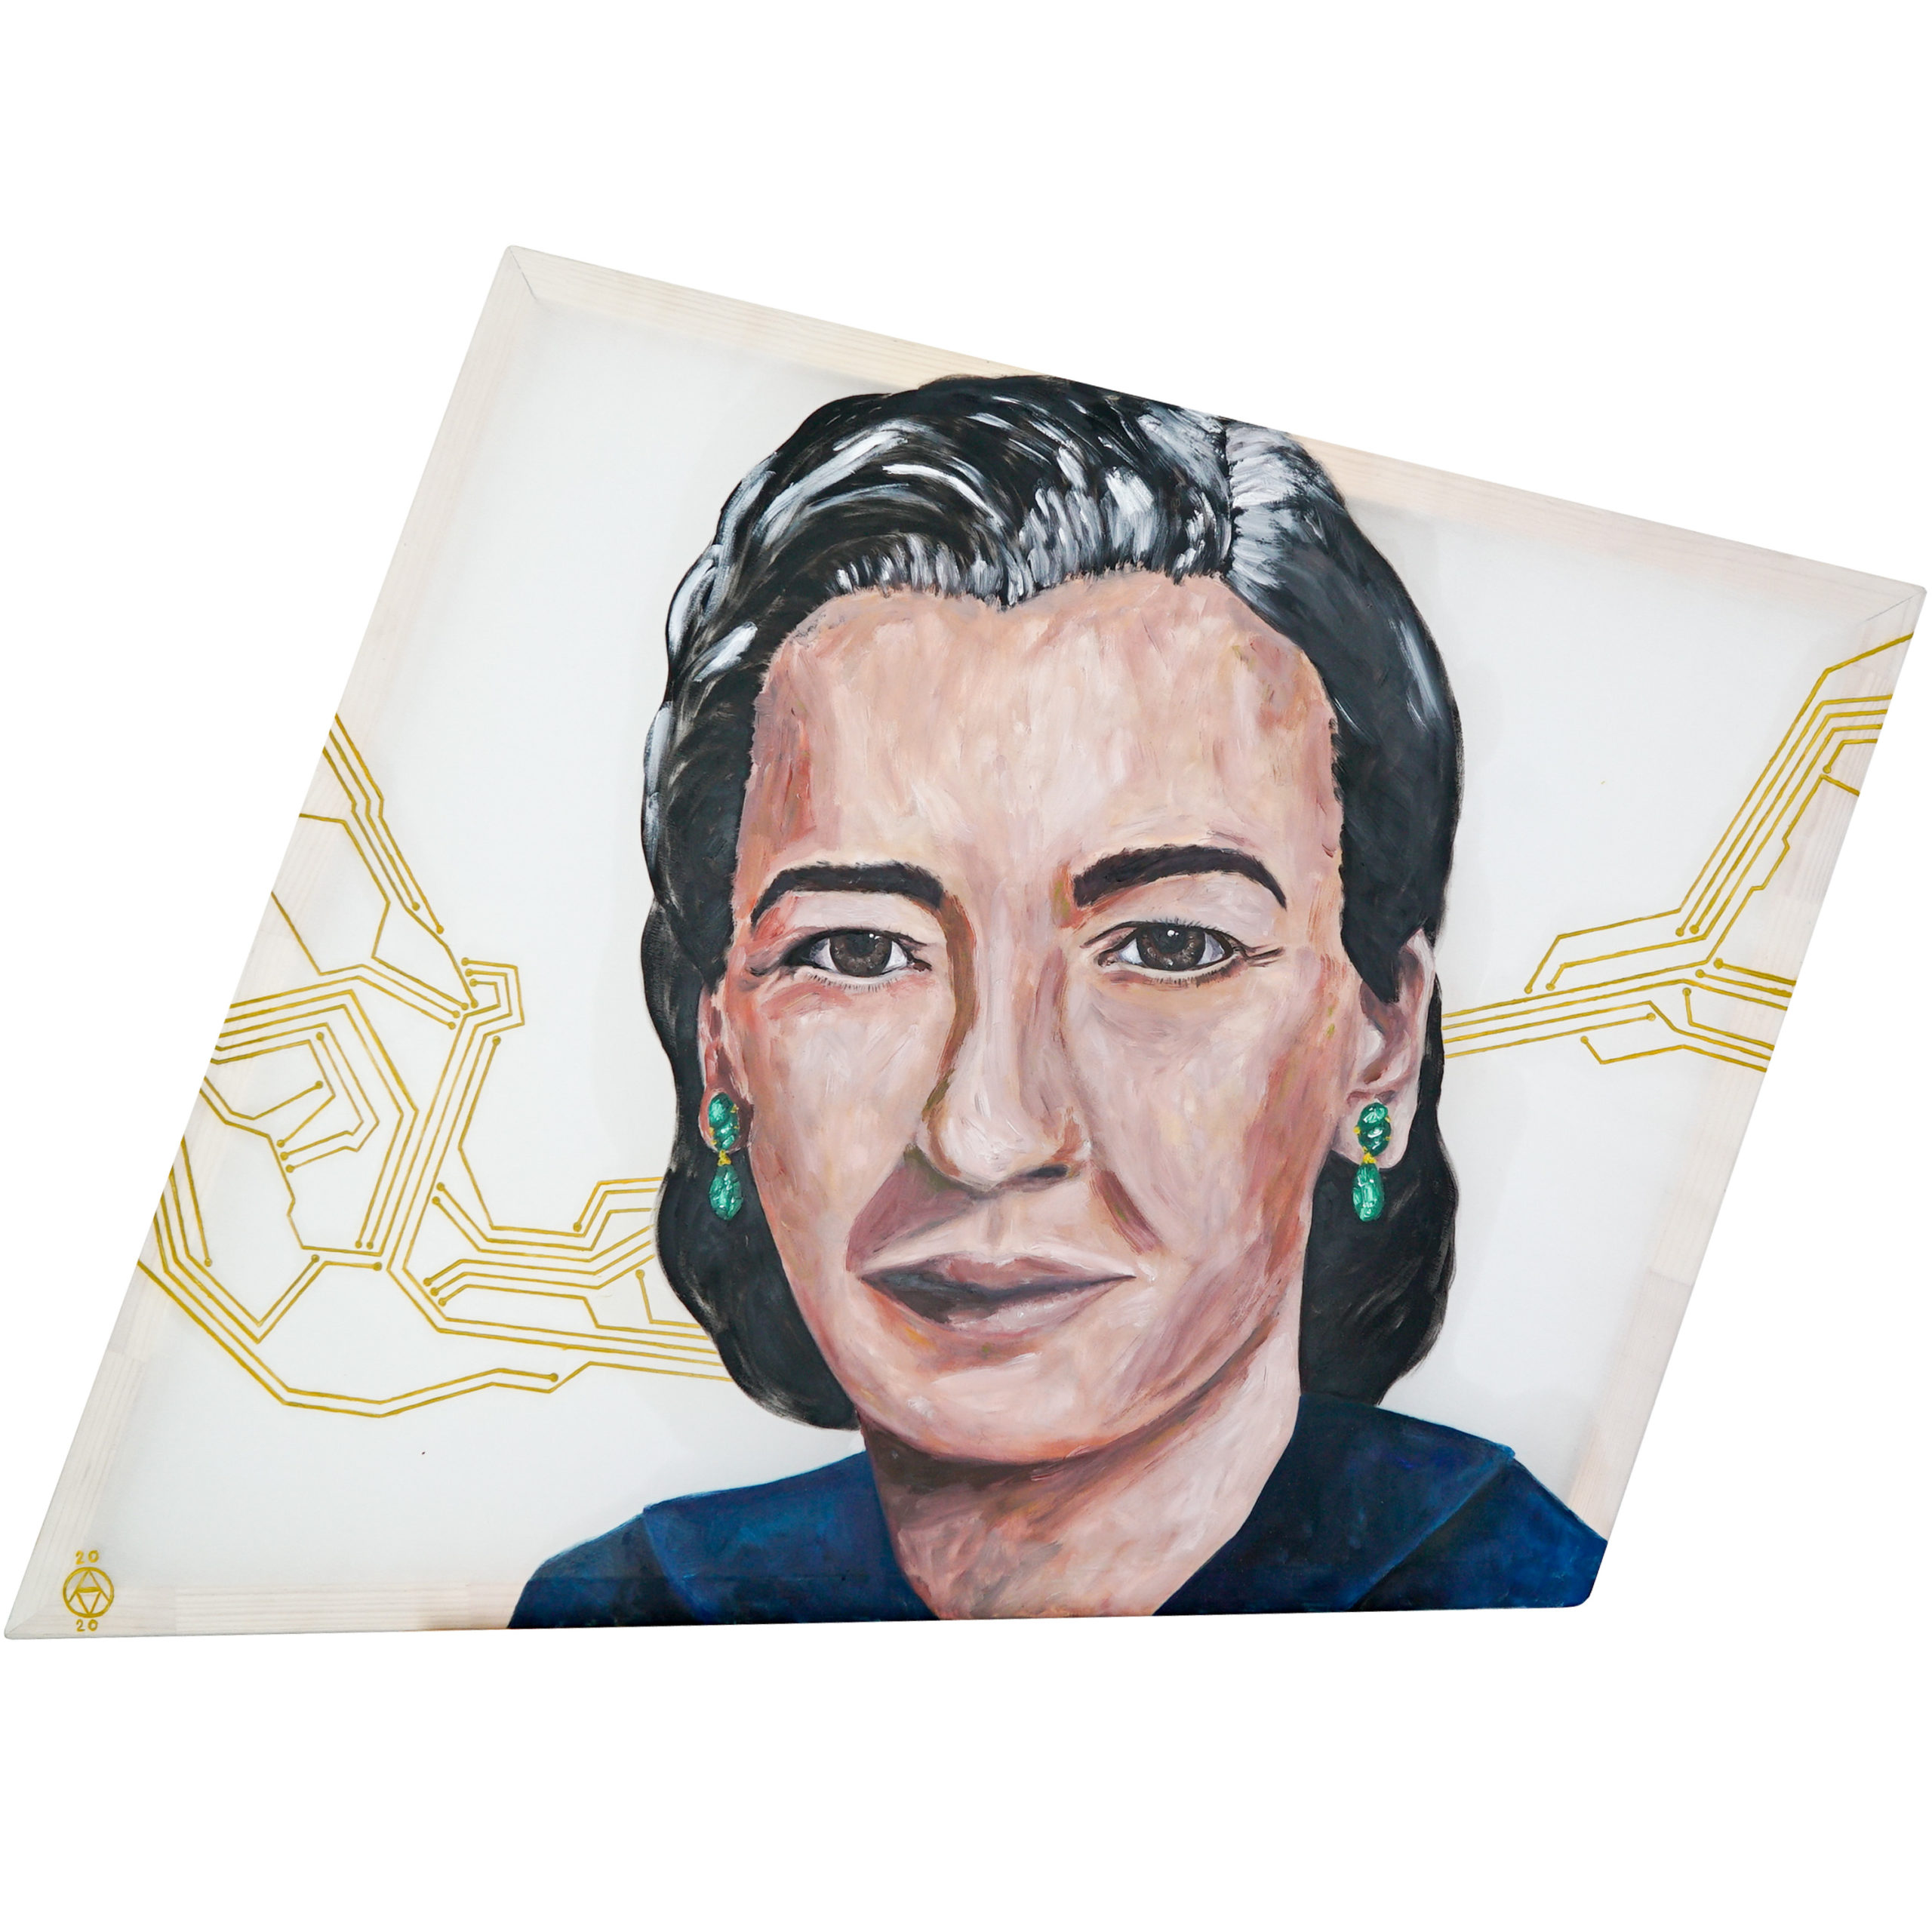 Dr Grace Murray Hopper painting portrait by Anya Vero in oil on silk